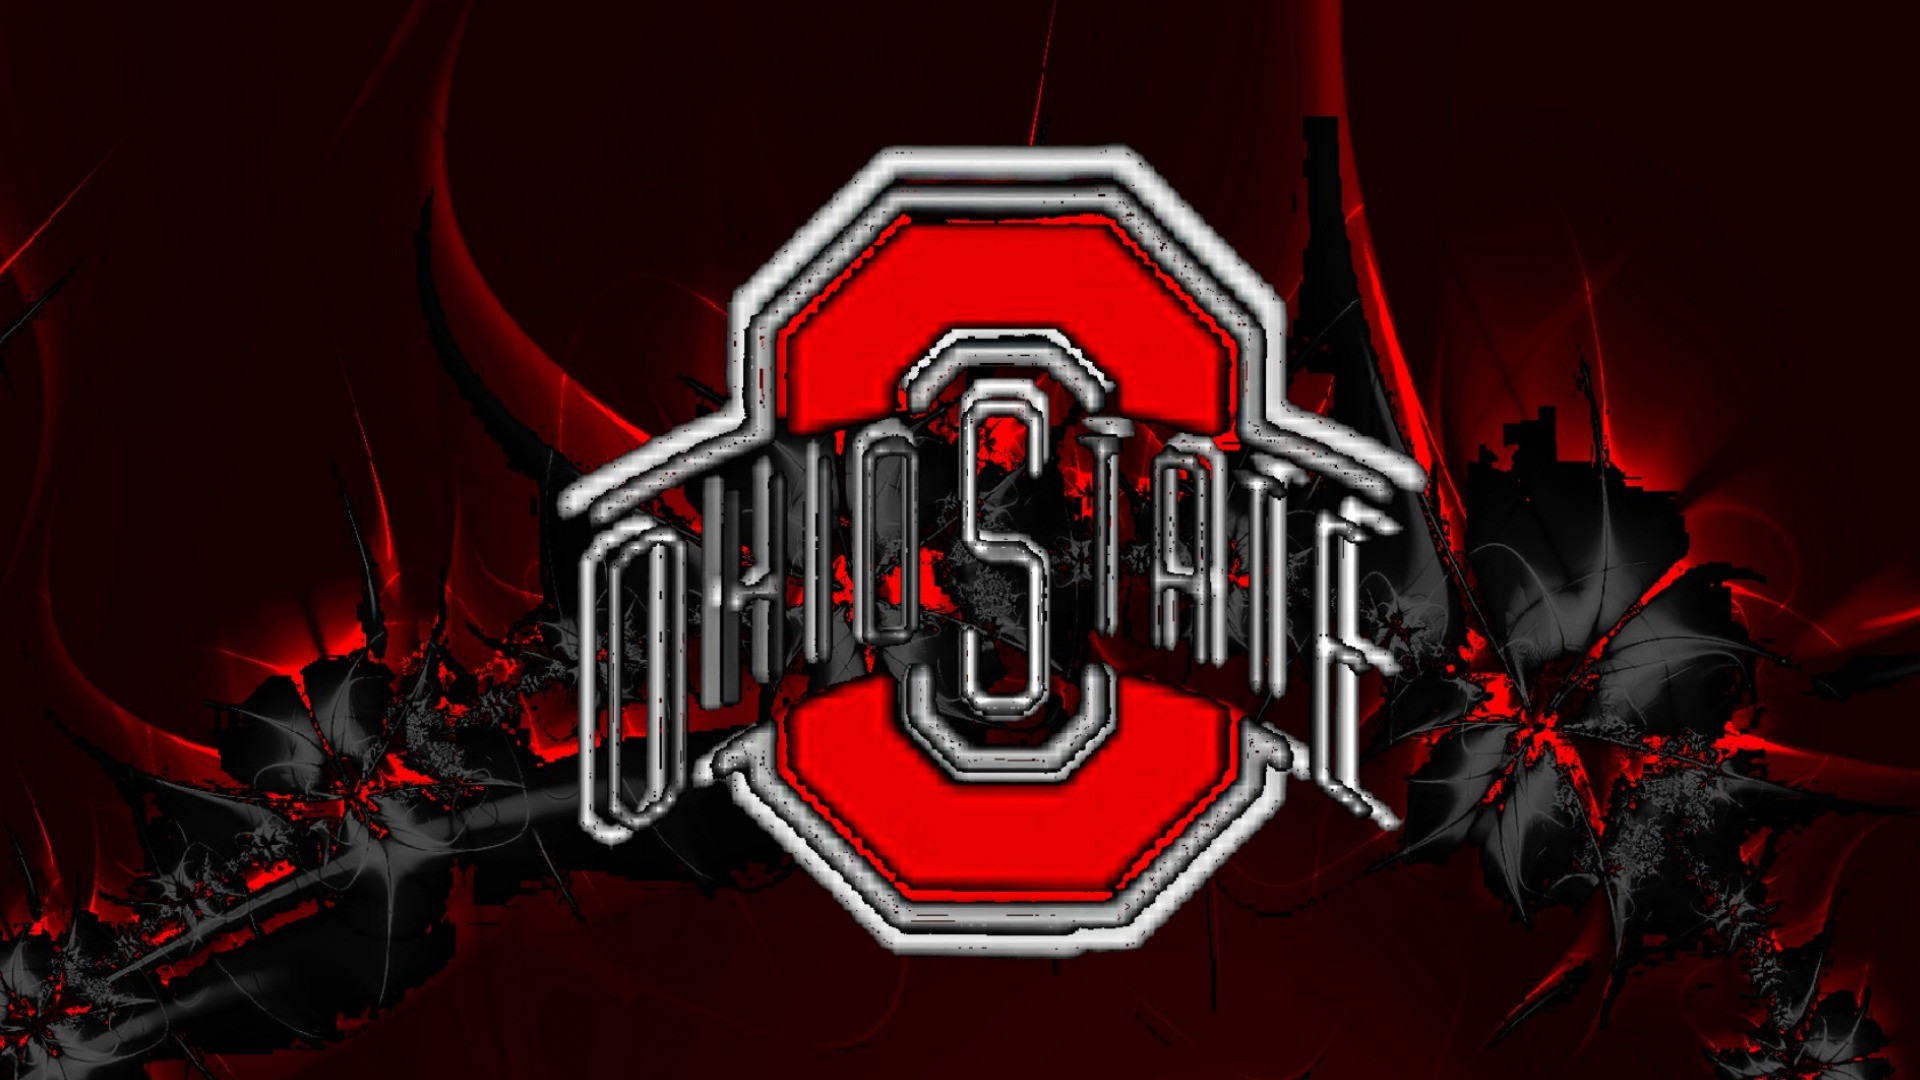 Best Ohio State Wallpapers (77+ images)